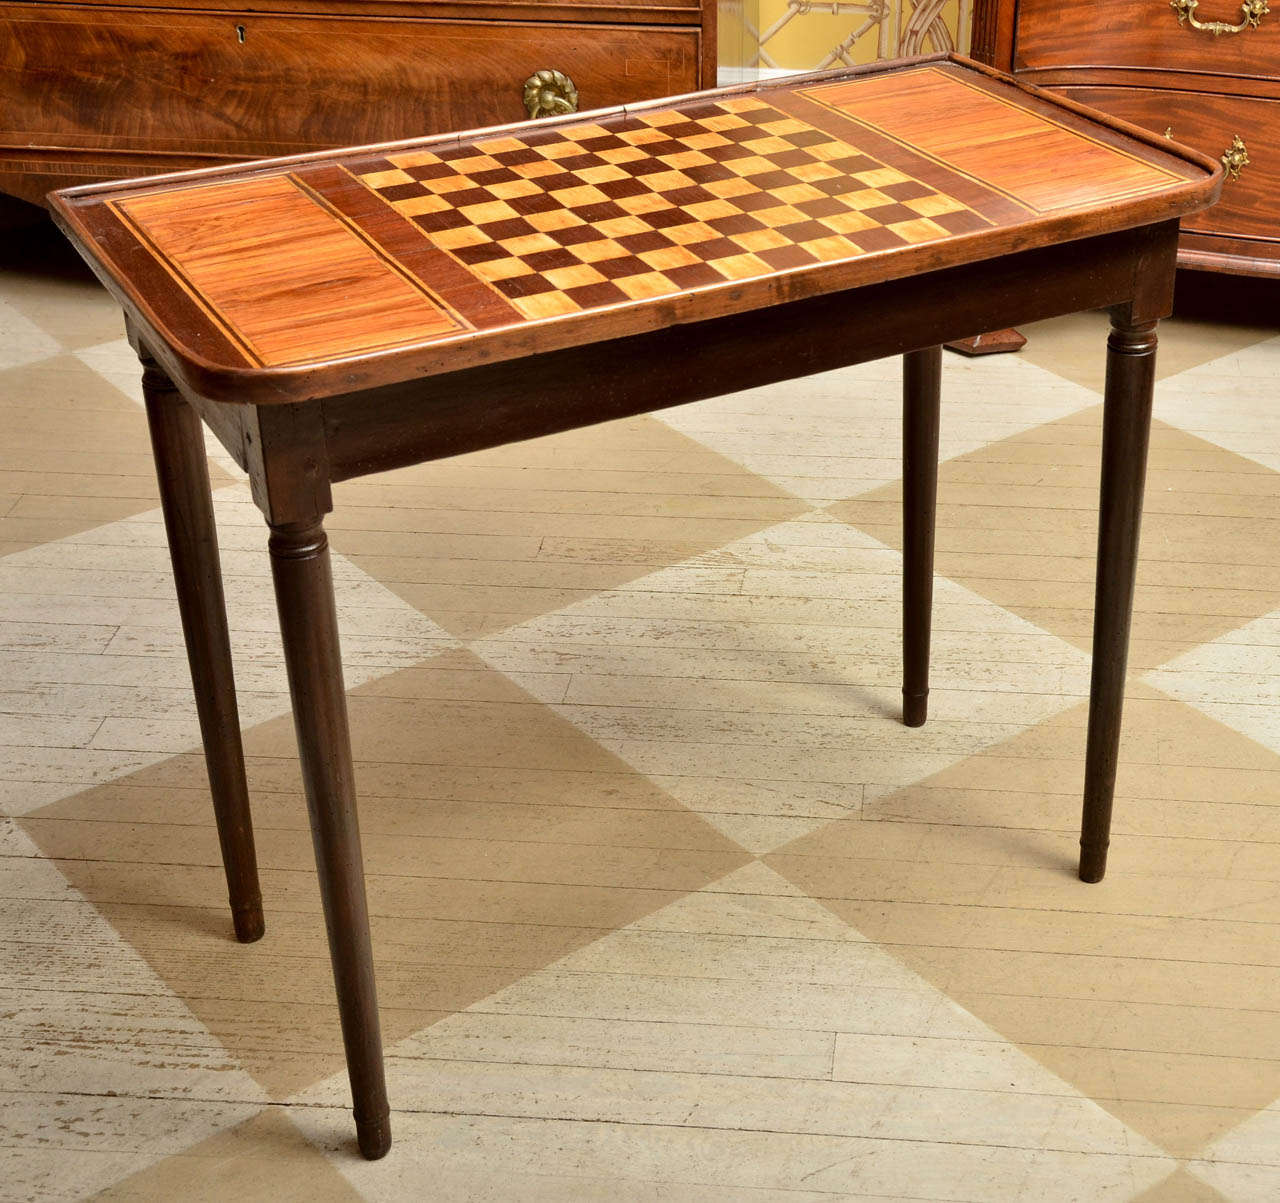 19th century late Regency English game table.